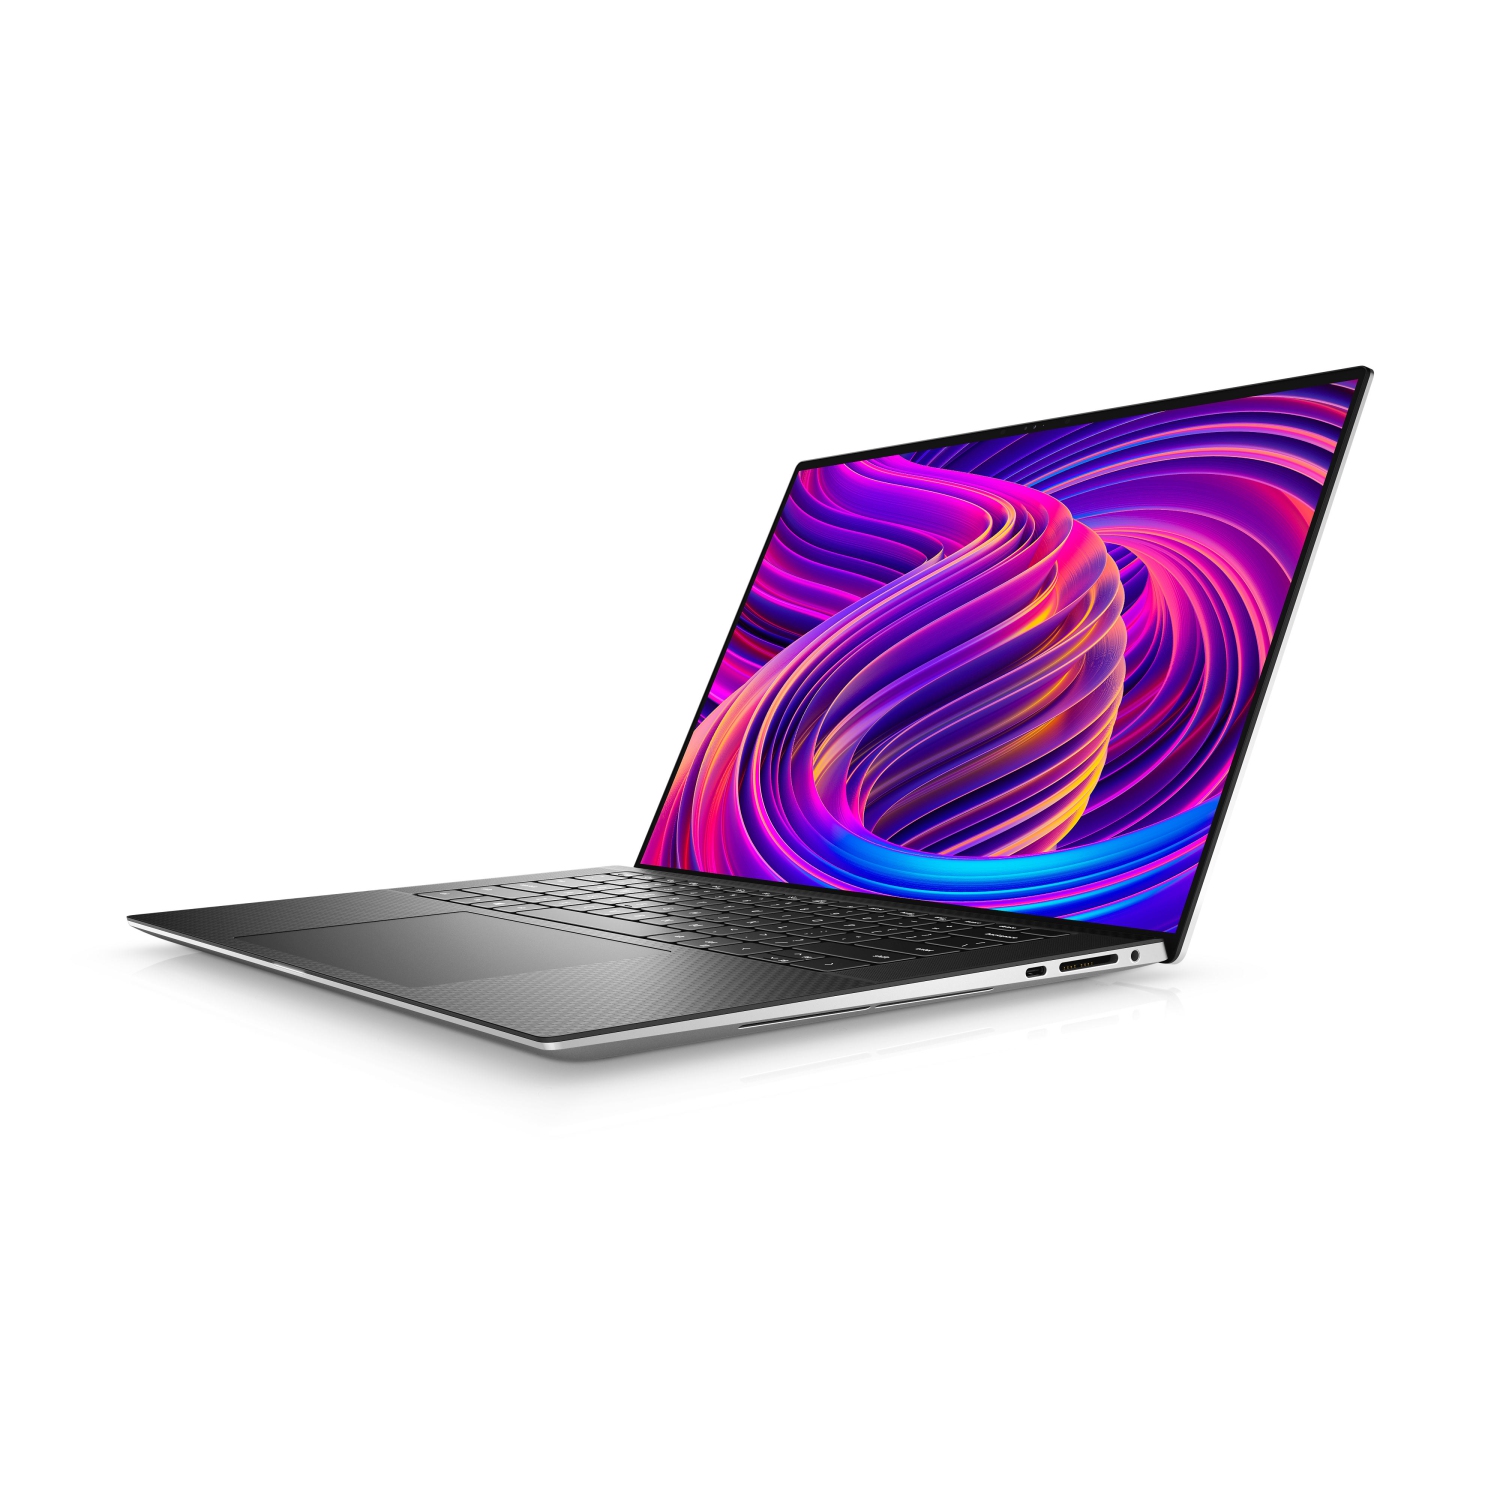 Refurbished (Excellent) - Dell XPS 15 9510 Laptop (2021), 15.6" 4K Touch, Core i9 - 4TB SSD - 64GB RAM - 3050 Ti, 8 Cores @ 4.9 GHz - 11th Gen CPU Certified Refurbished